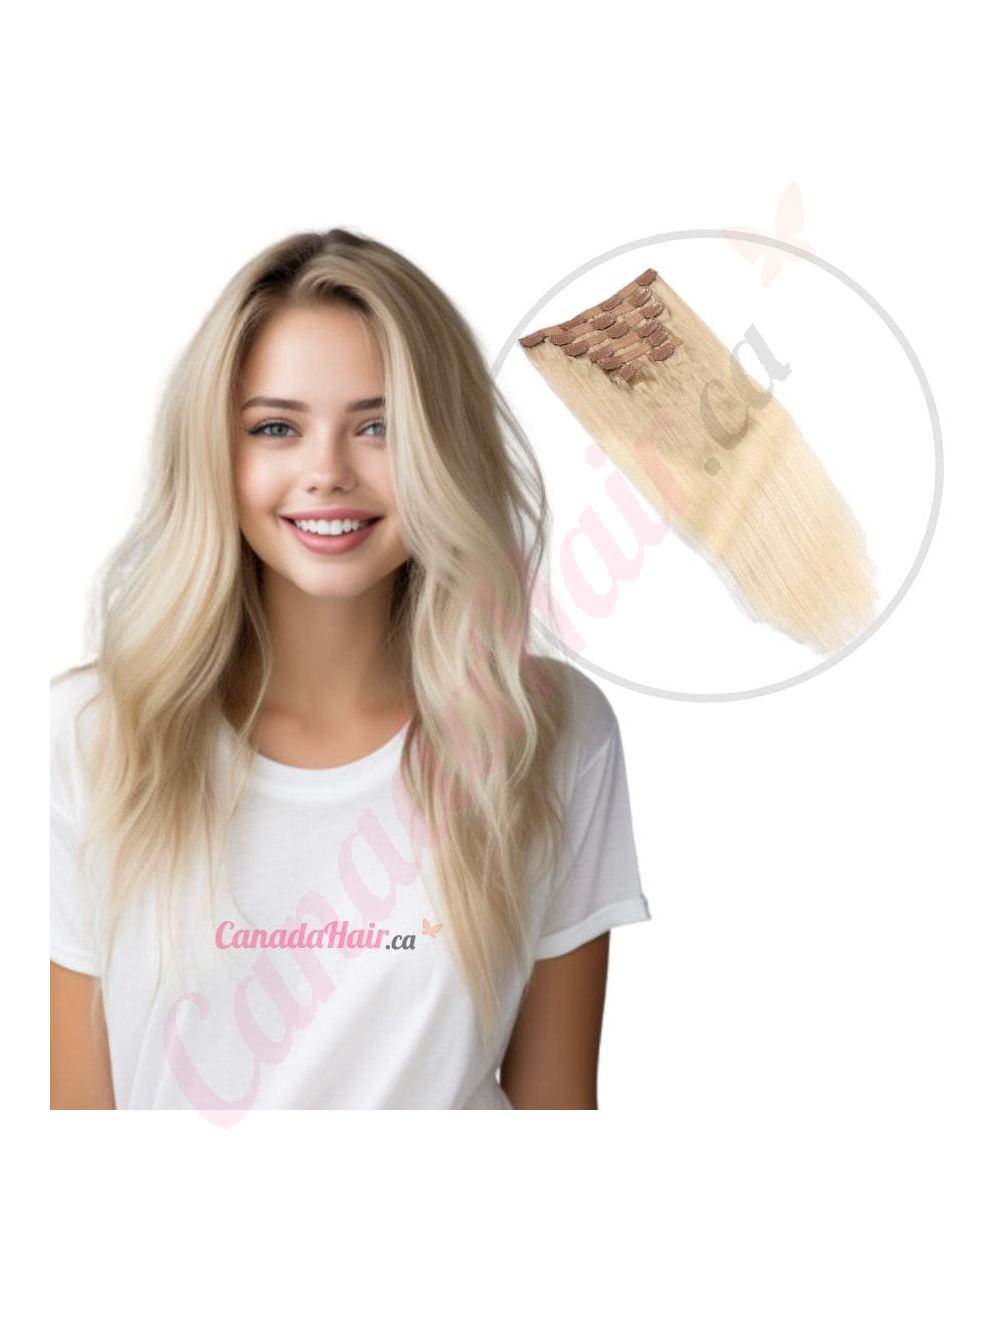 High Quality Ombre Blonde Hairpieces Synthetic Long Wavy Hair Extensions  Natural Black Clips in Hair Extensions - China Hair Extensions and Hair  Products price